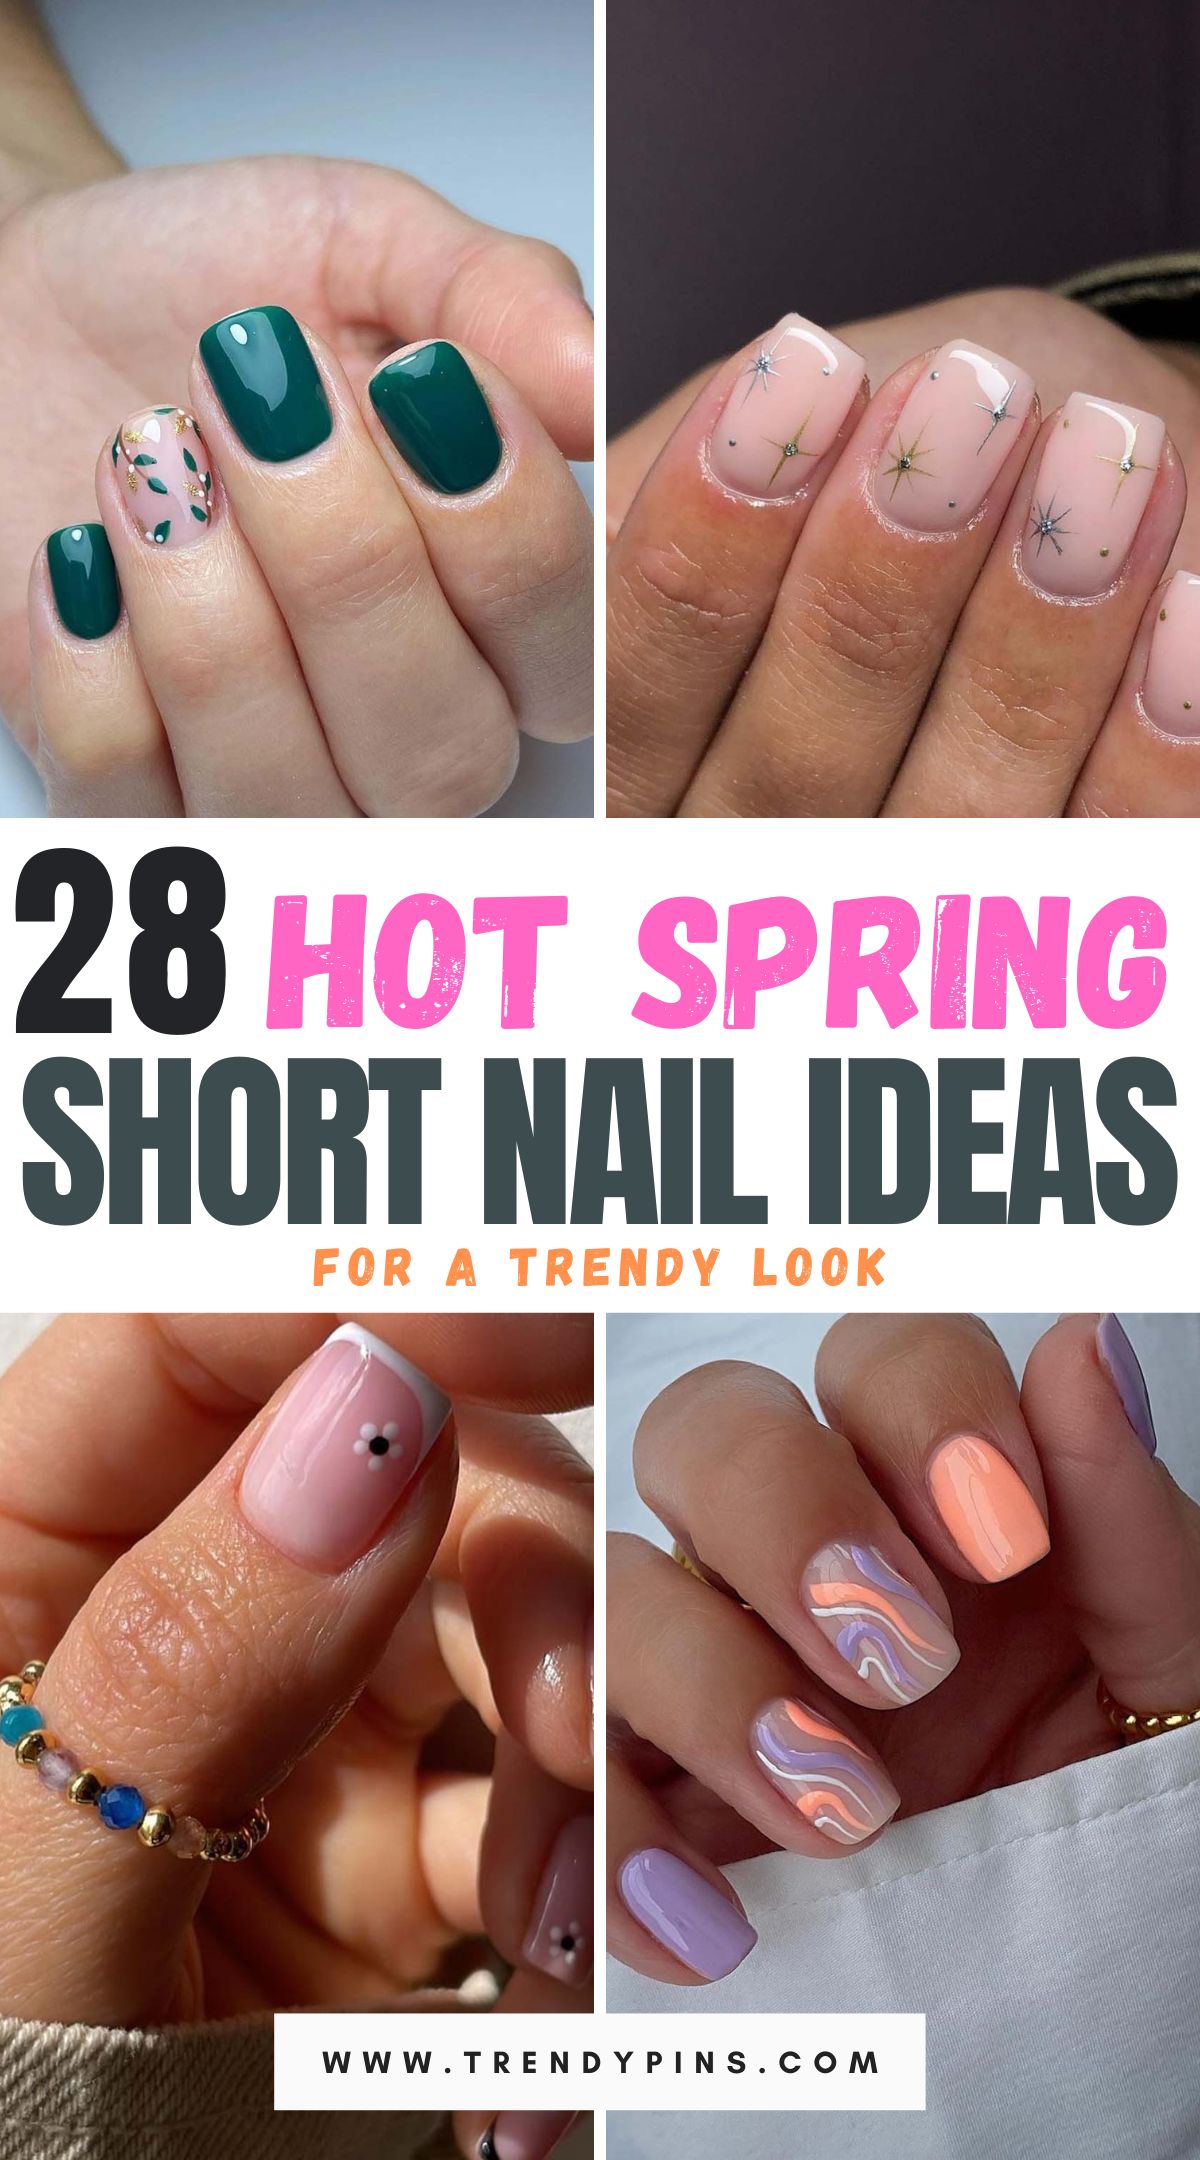 Discover 28 chic spring short nail designs to refresh your look. Get inspired with the latest trends and colors for a stylish manicure.